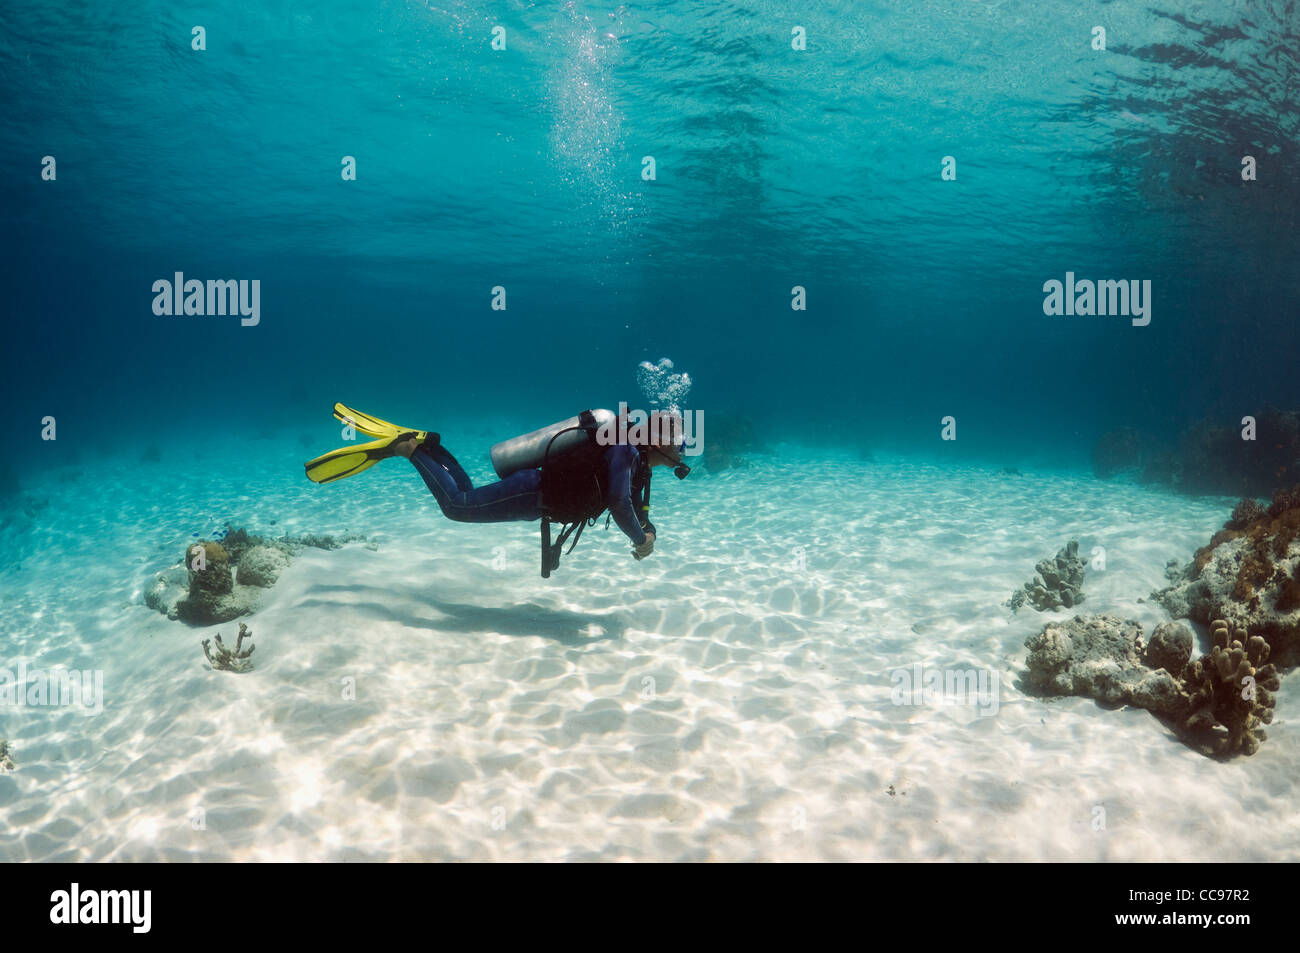 Male diver swimming over sandy bottom on shallow reef. Komodo National Park, Indonesia. Stock Photo